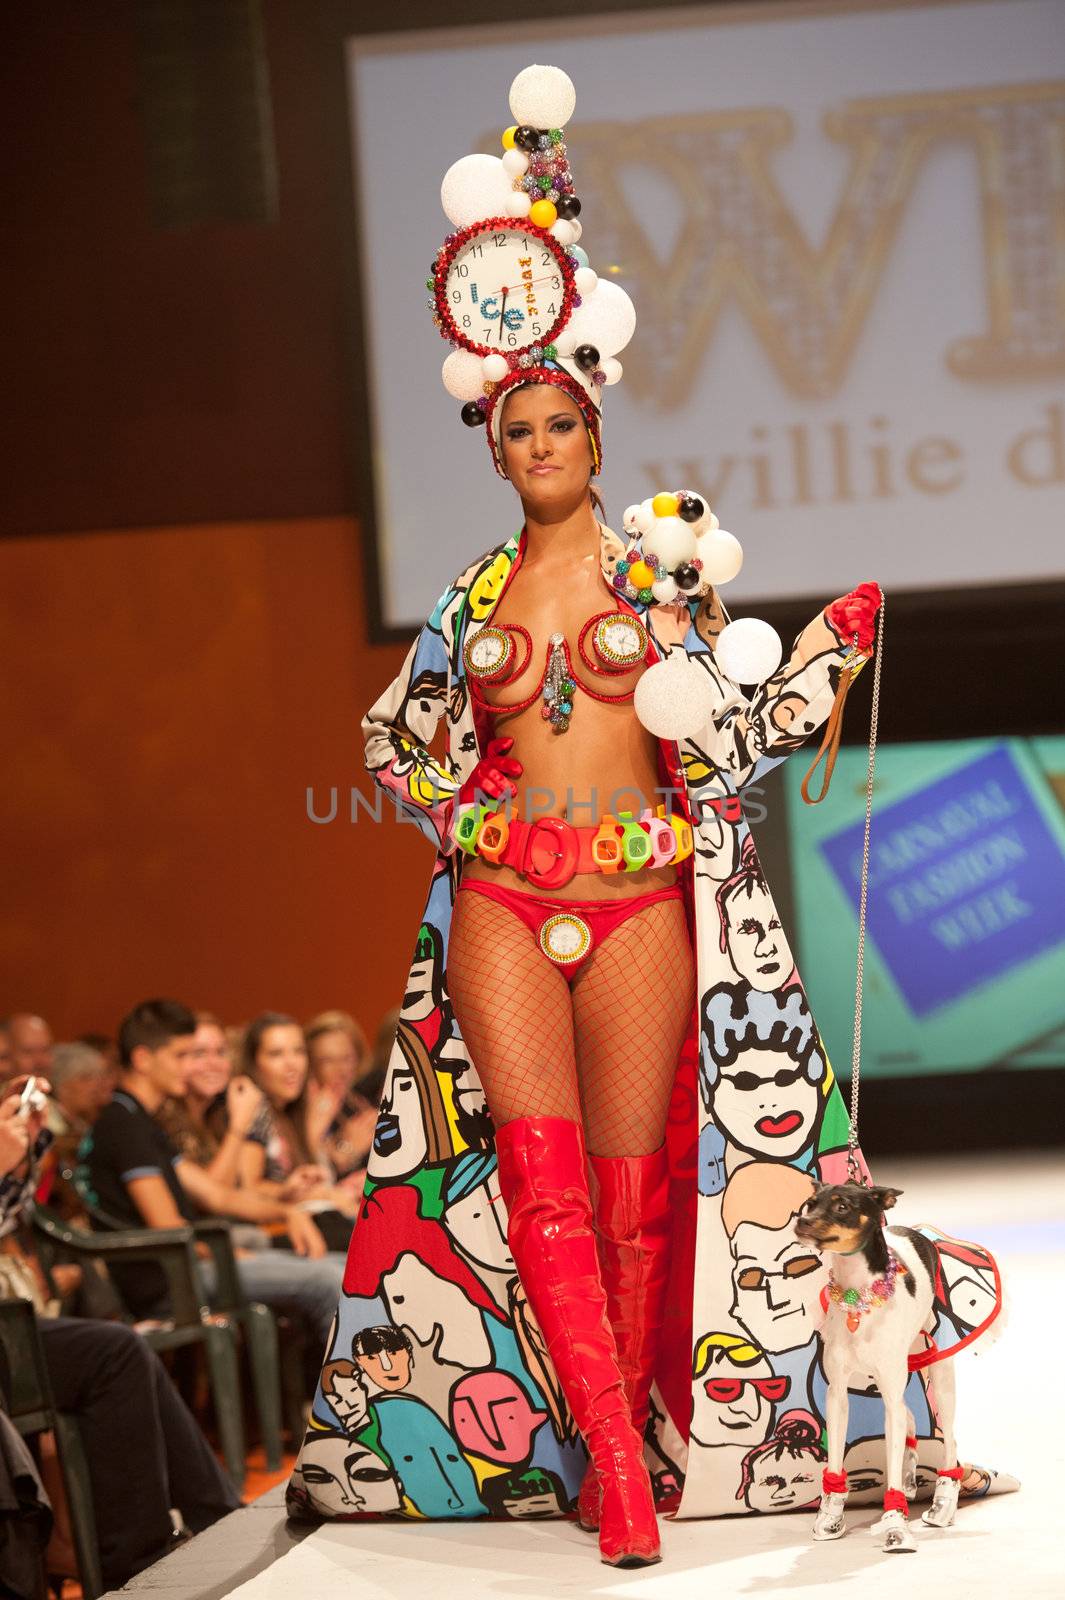 CANARY ISLANDS - 29 OCTOBER: Model on the catwalk wearing carnival costume from designer Willie Diaz during Carnival Fashion Week October 29, 2011 in Canary Islands, Spain